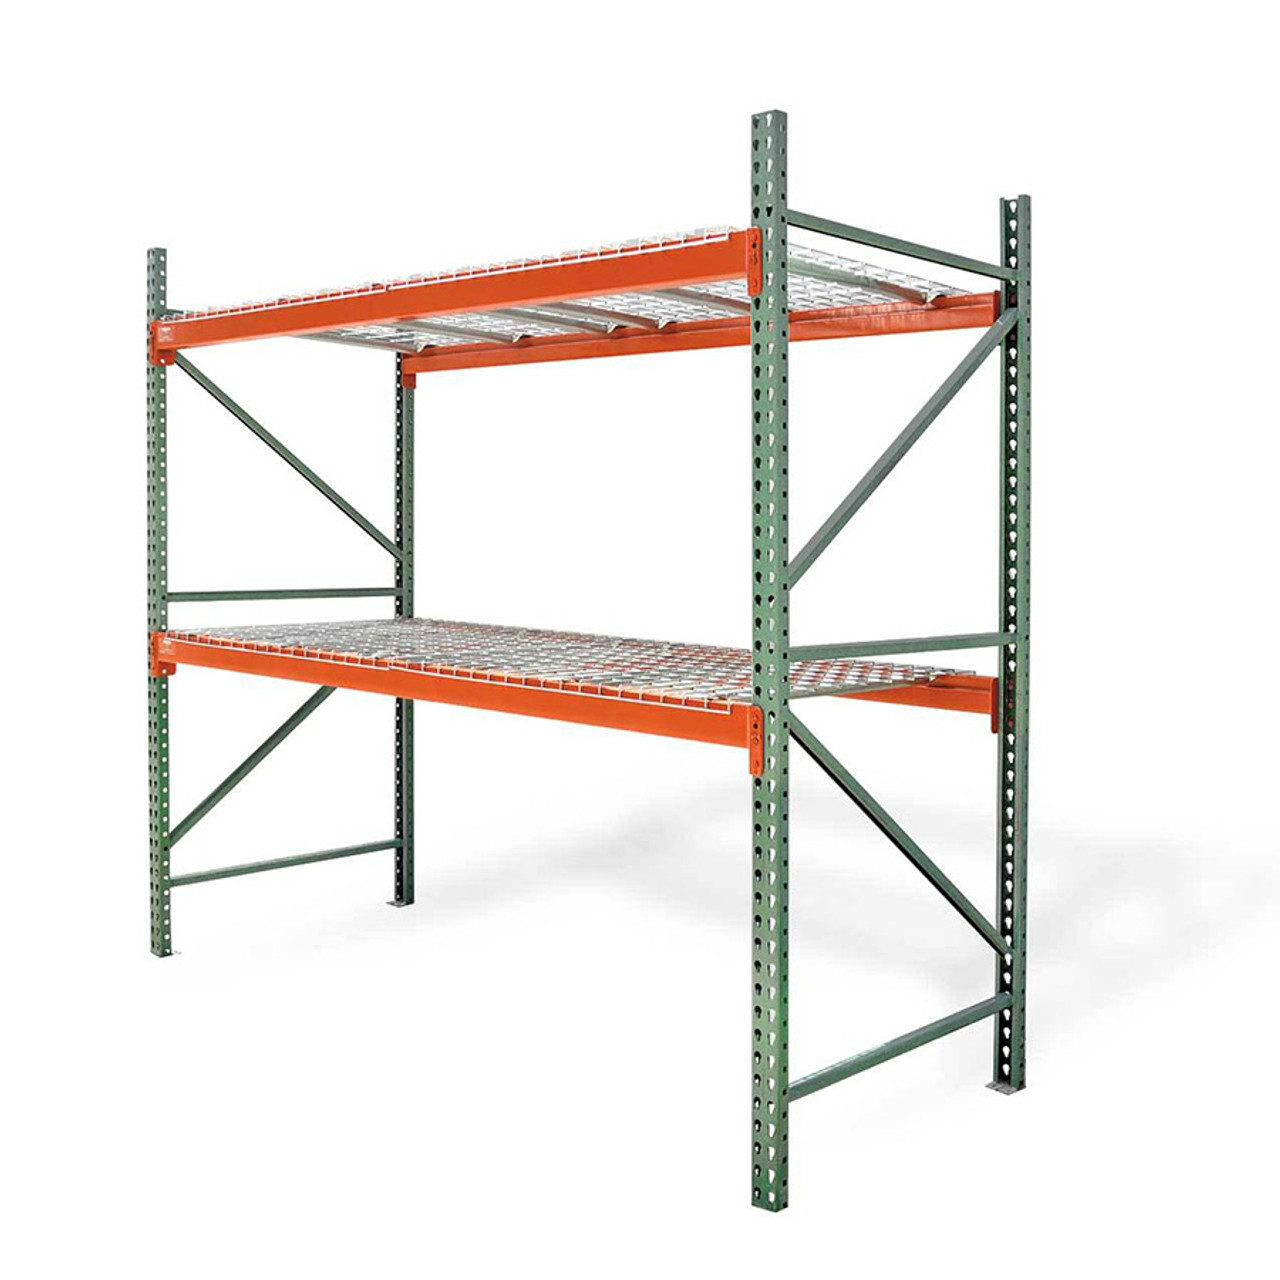 Pallet rack starter kit with wire decking